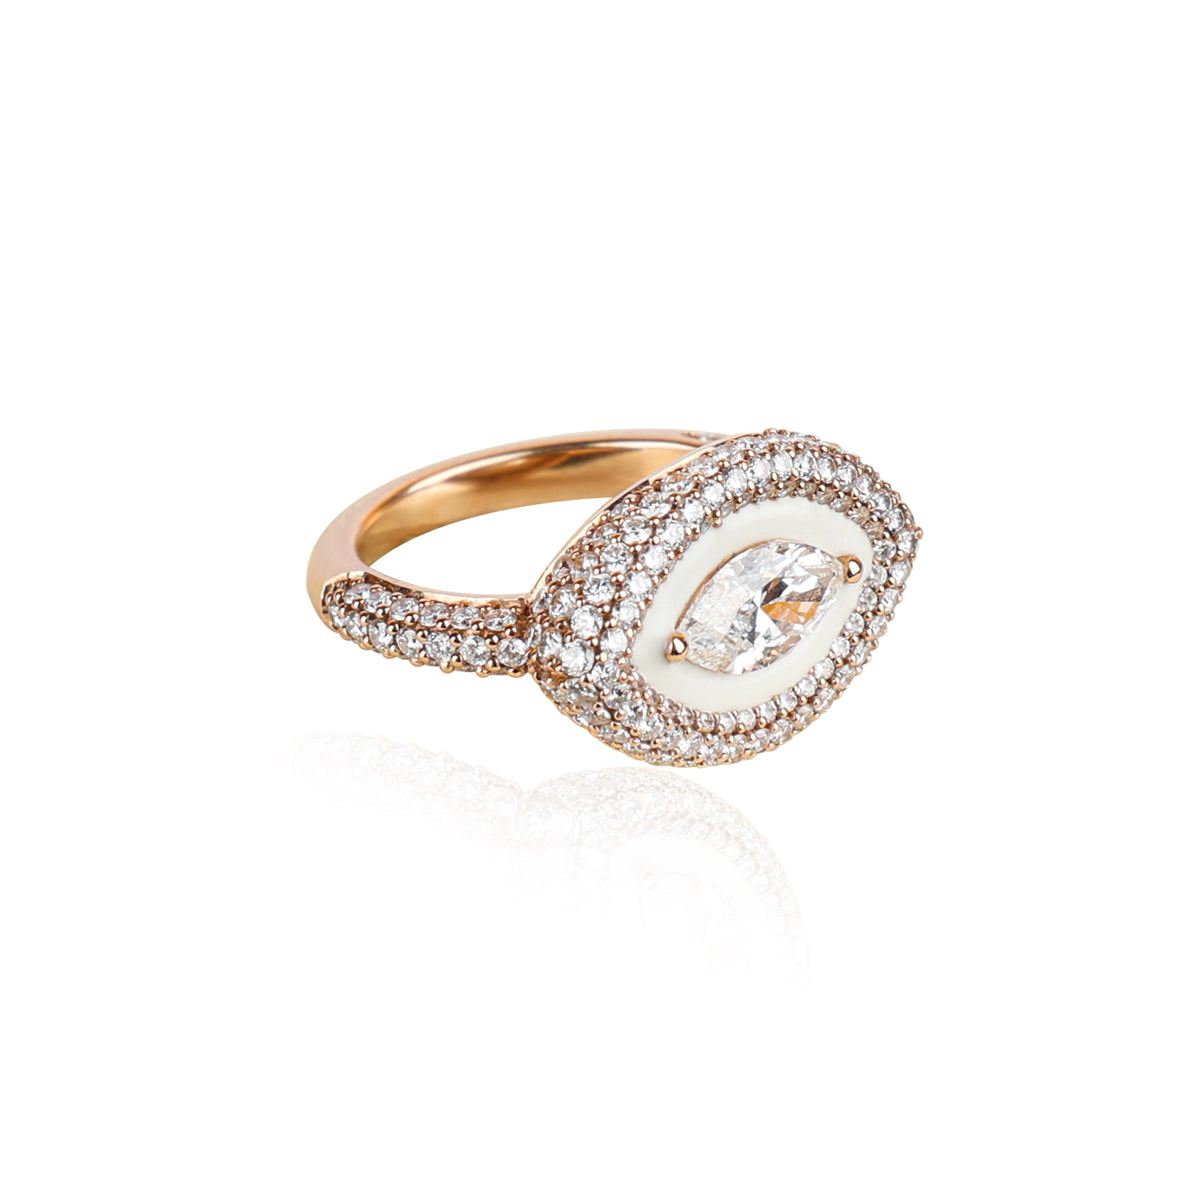 Marquise 18k rose gold, diamond and enamel pinky ring